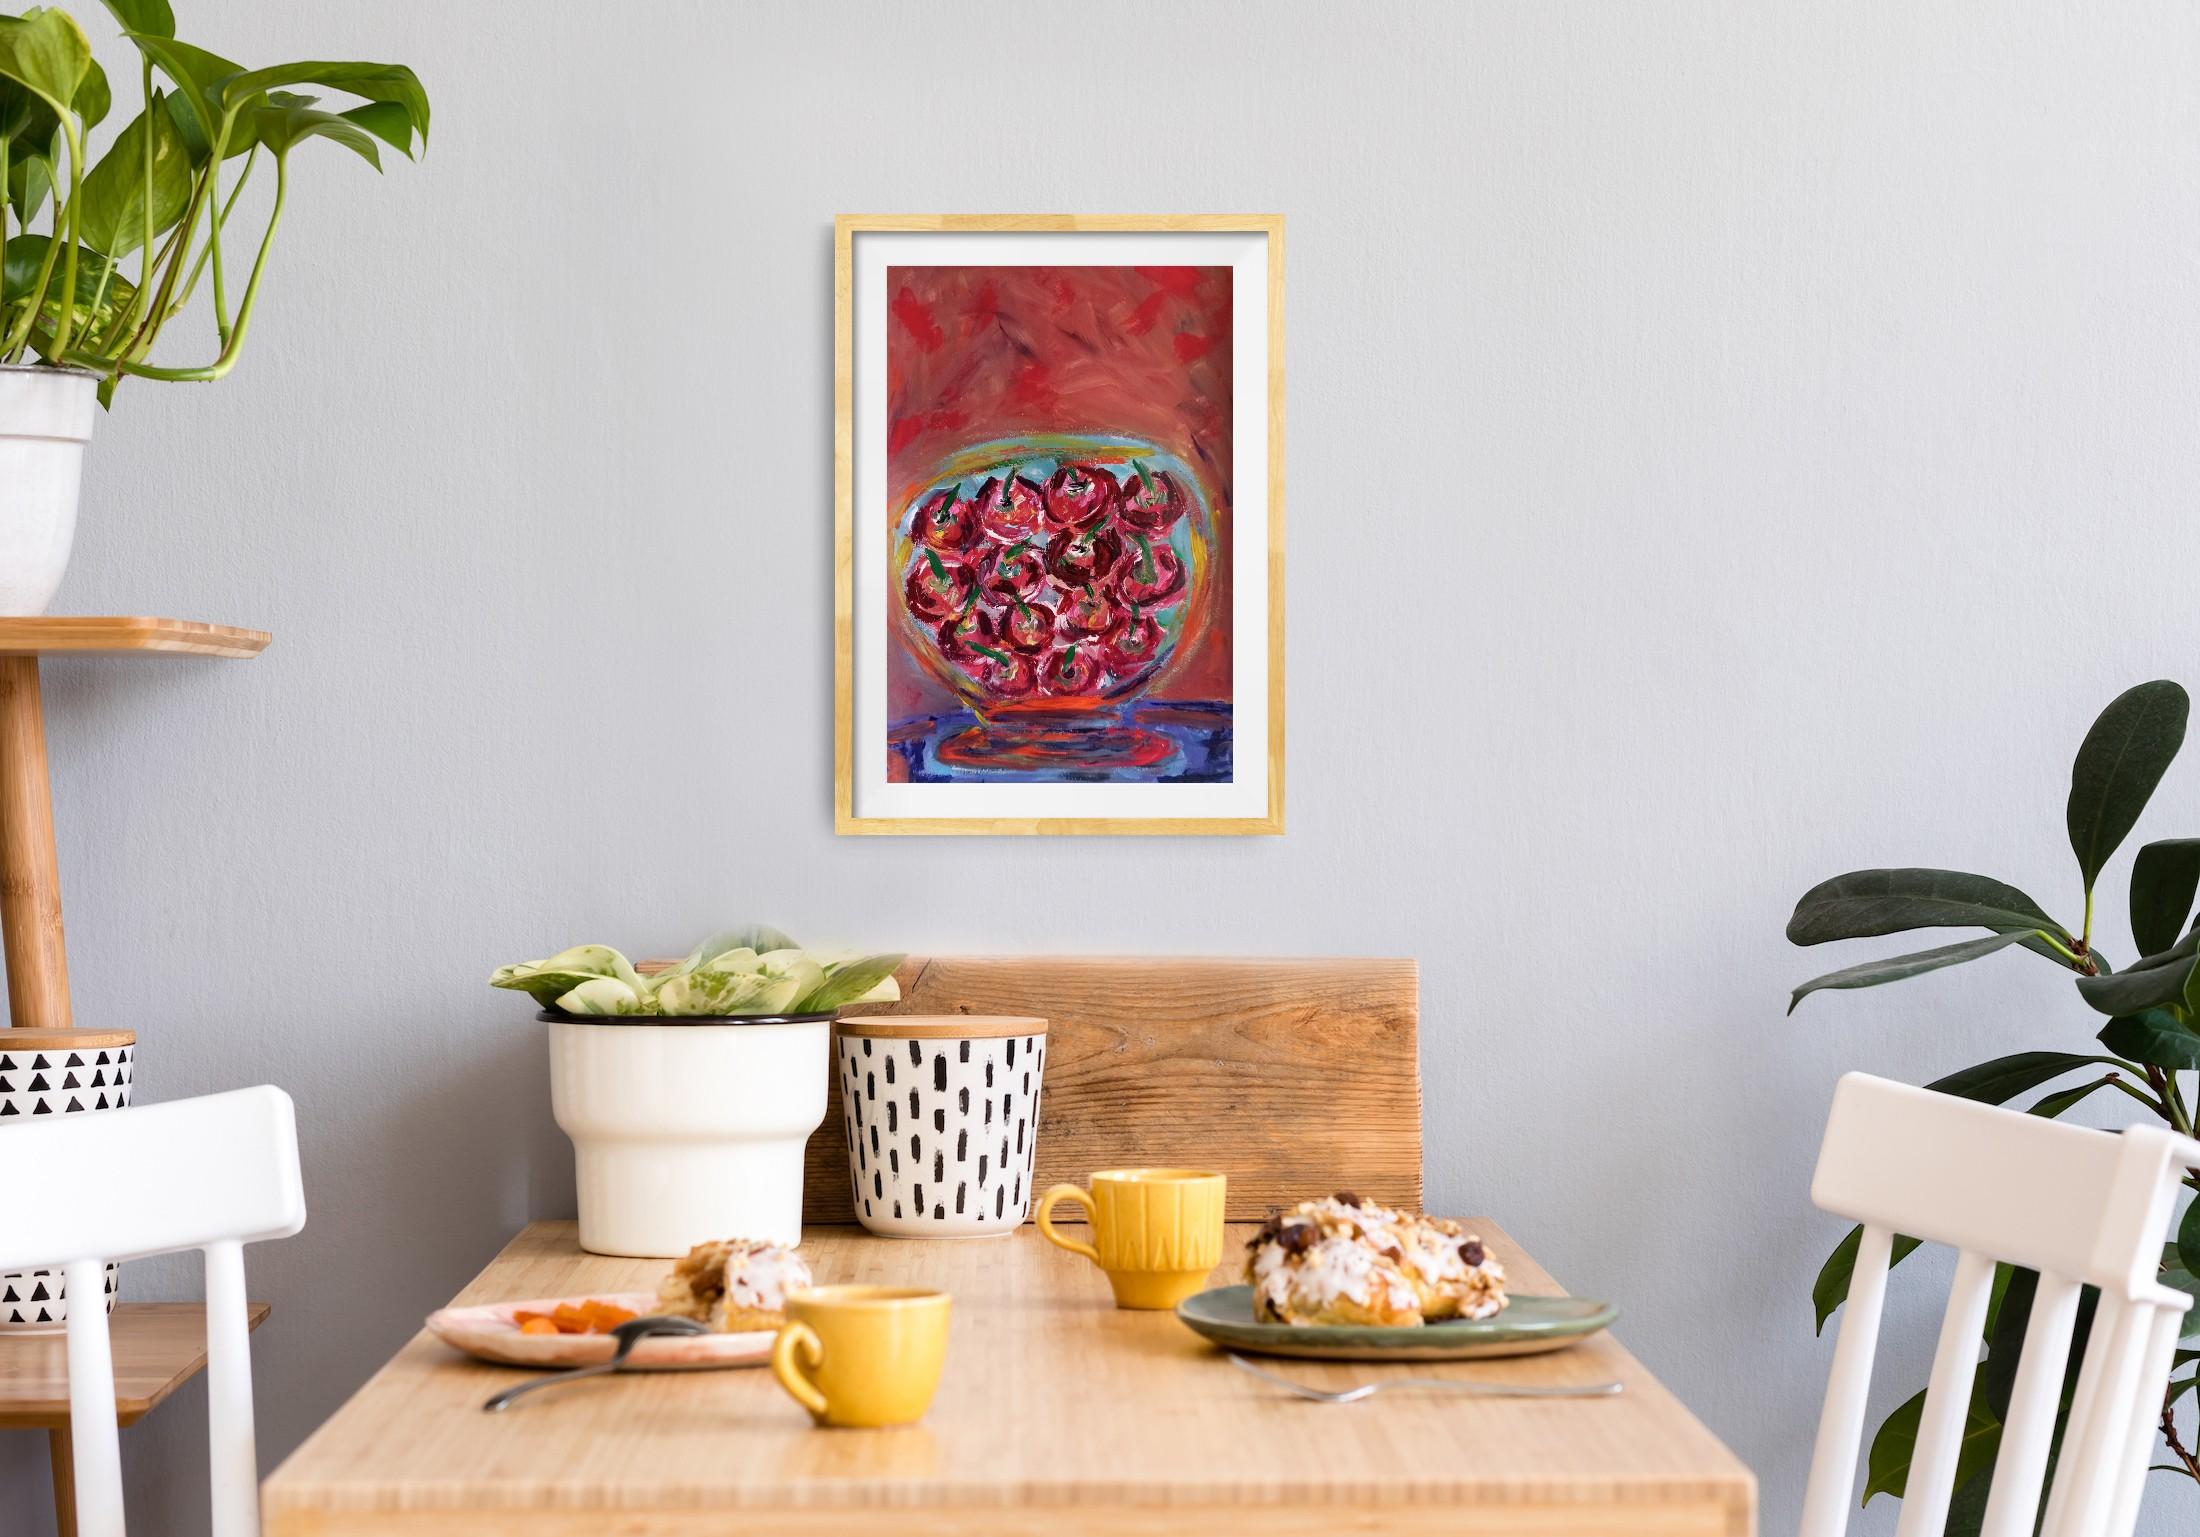 I enjoy working on semi-abstract artworks with a touch of impressionism. I was  inspired by the paintings of Claude Monet,   Paul Cézanne and Vincent Van Gogh while working on this piece.

These bright colors celebrates a summer period with its